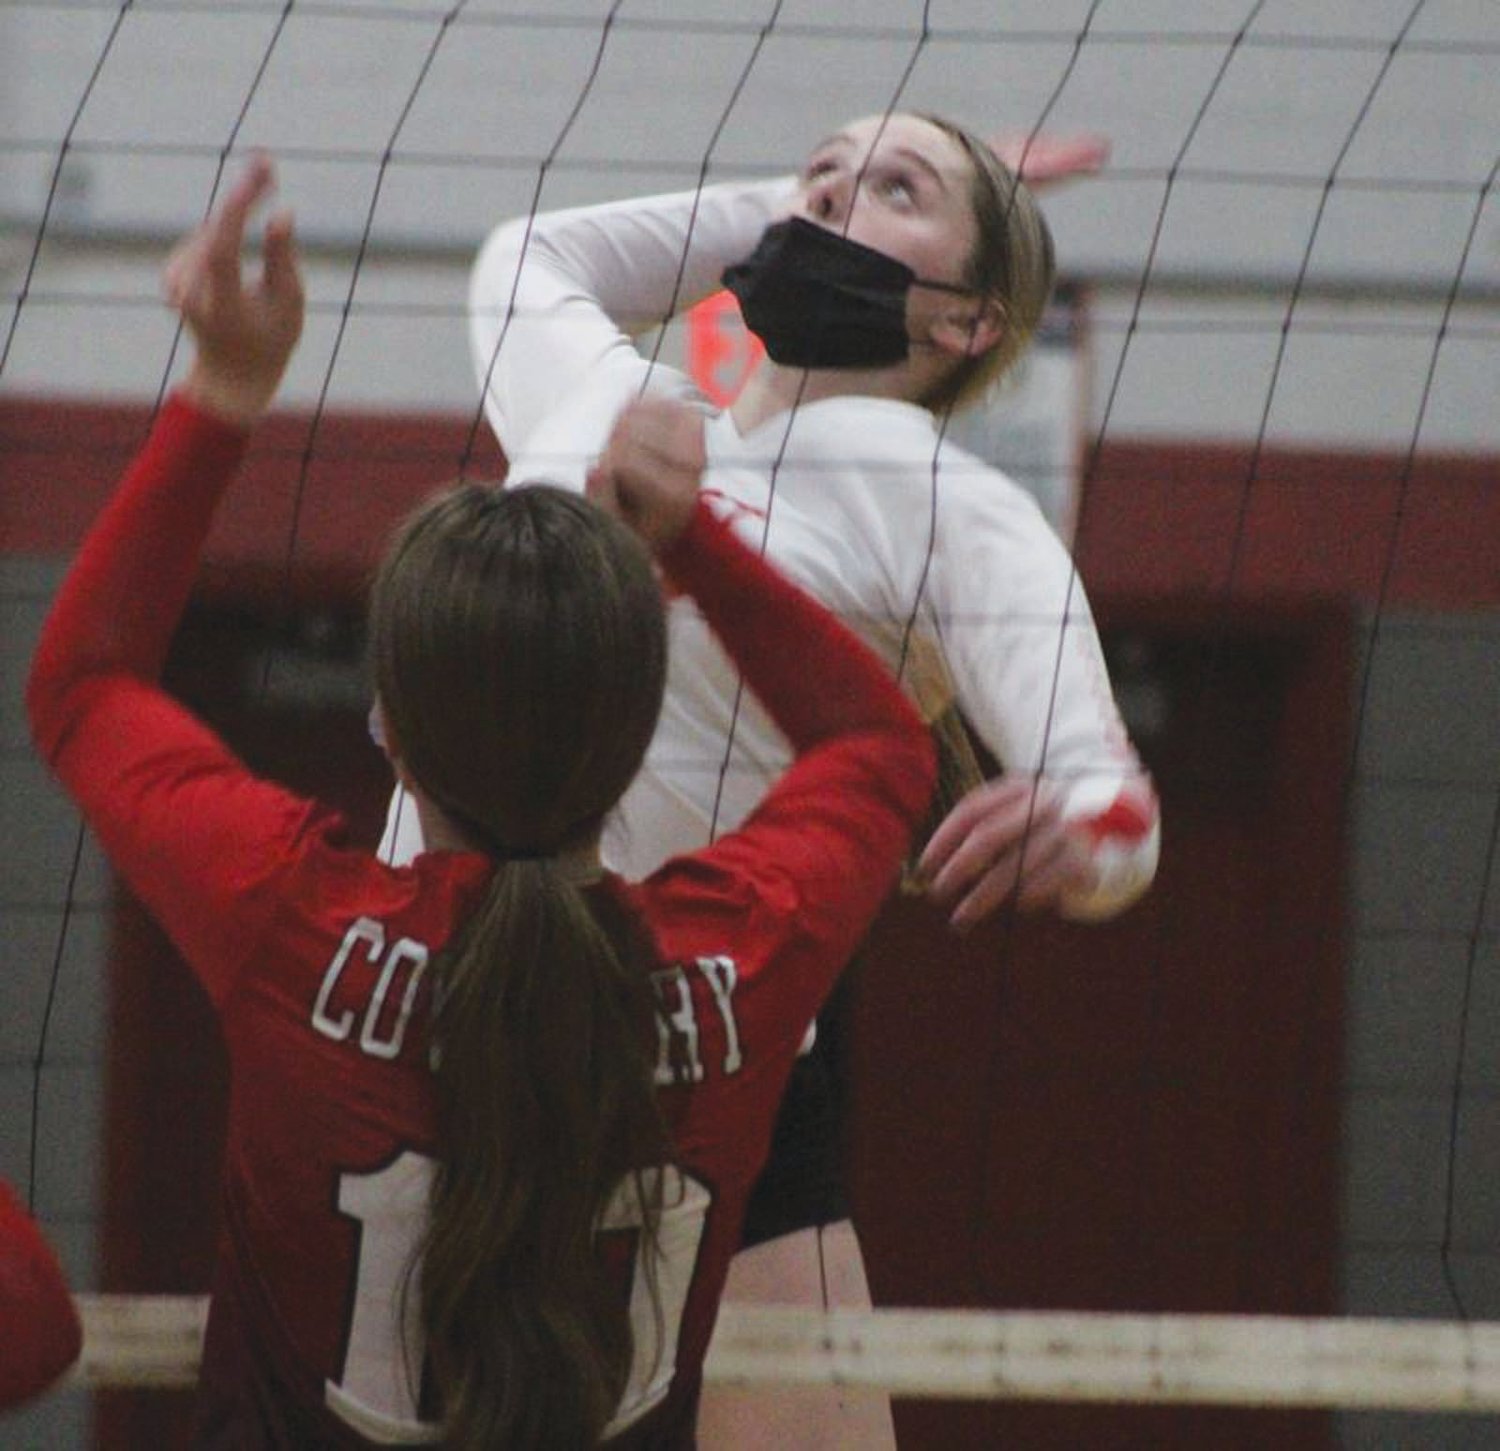 SPIKE: Cranston West’s Emily Bessette leaps to spike
the ball on Monday.